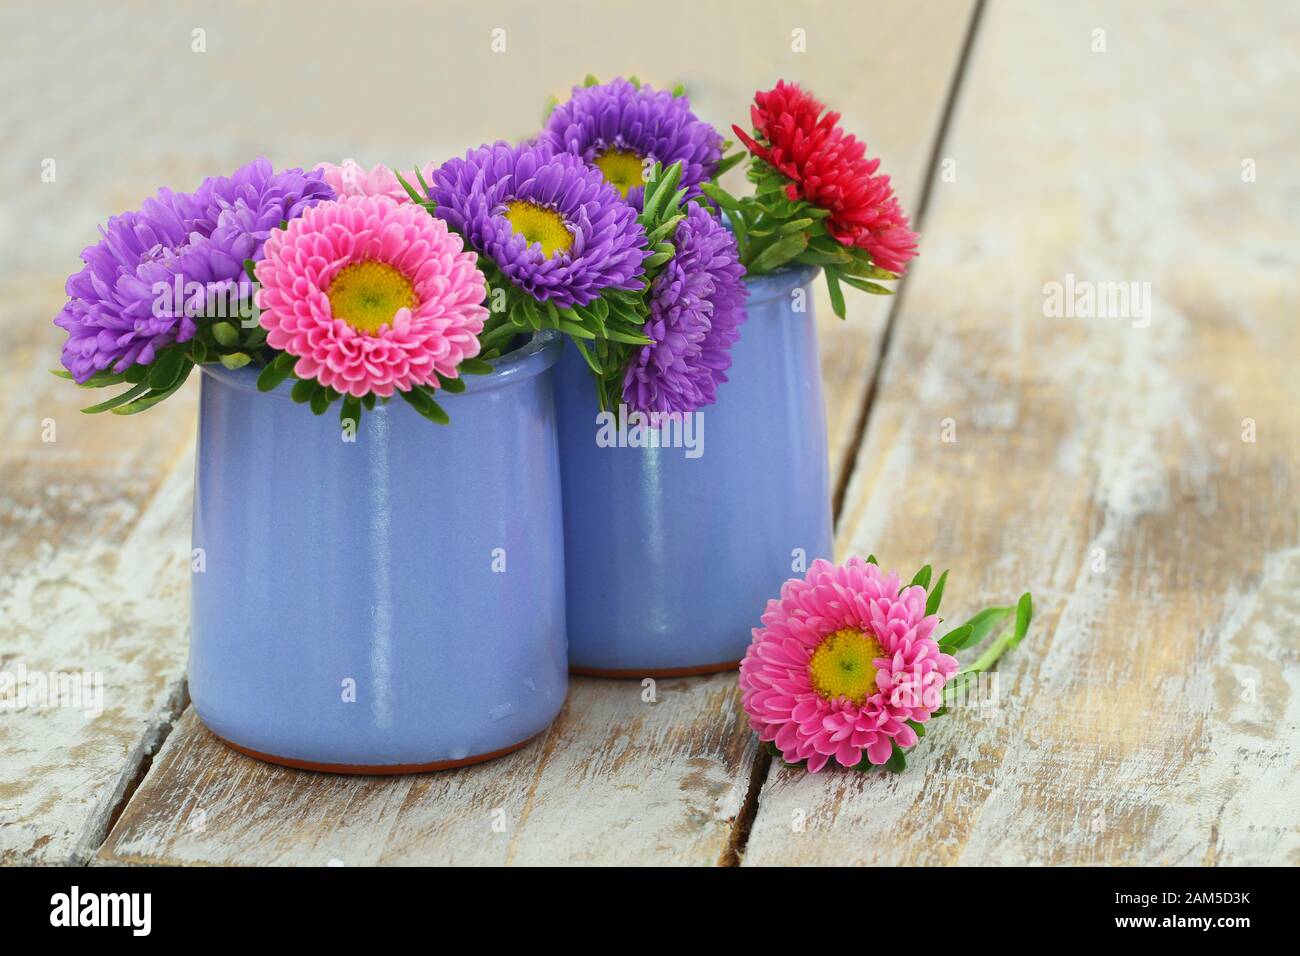 Colorful daisies in blue vase on wooden surface with copy space Stock Photo